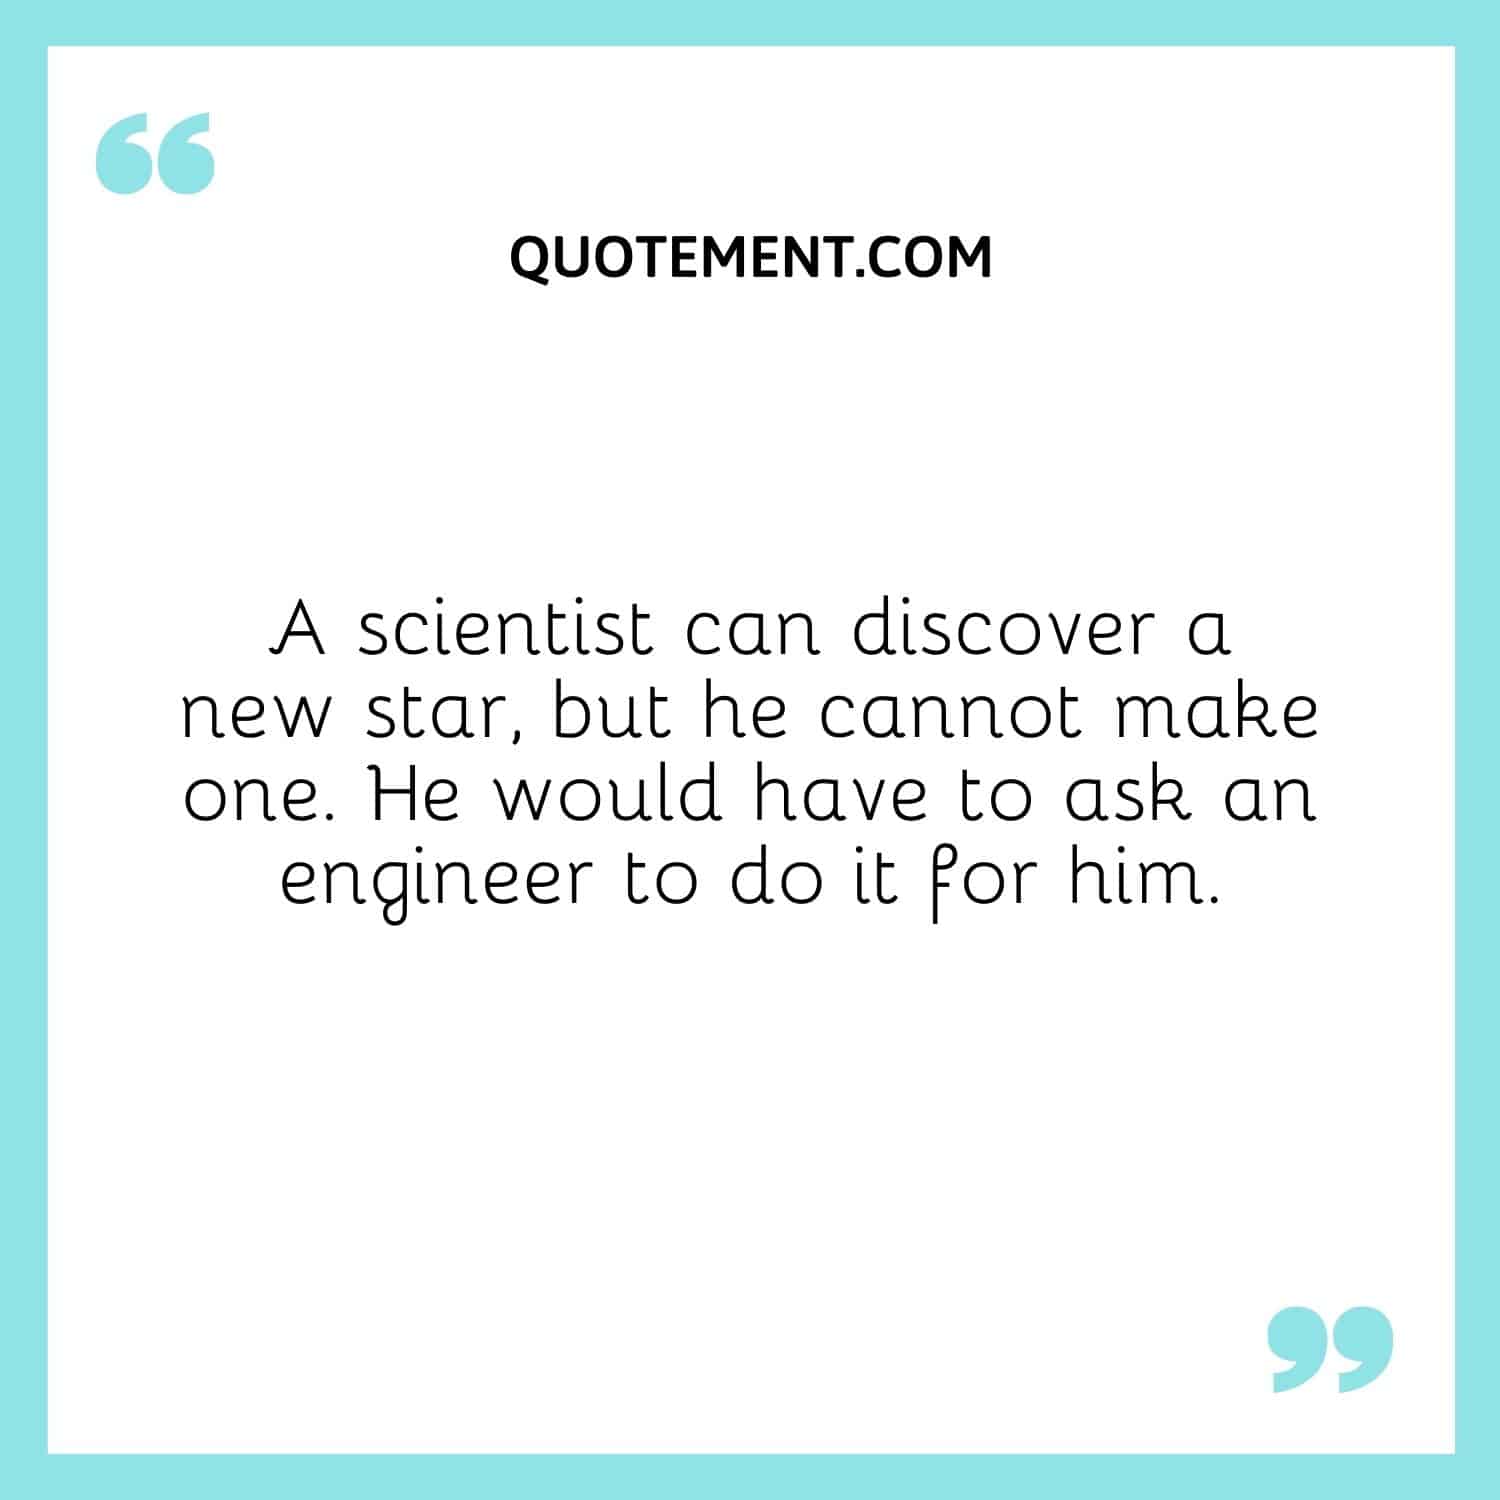 A scientist can discover a new star, but he cannot make one. He would have to ask an engineer to do it for him.